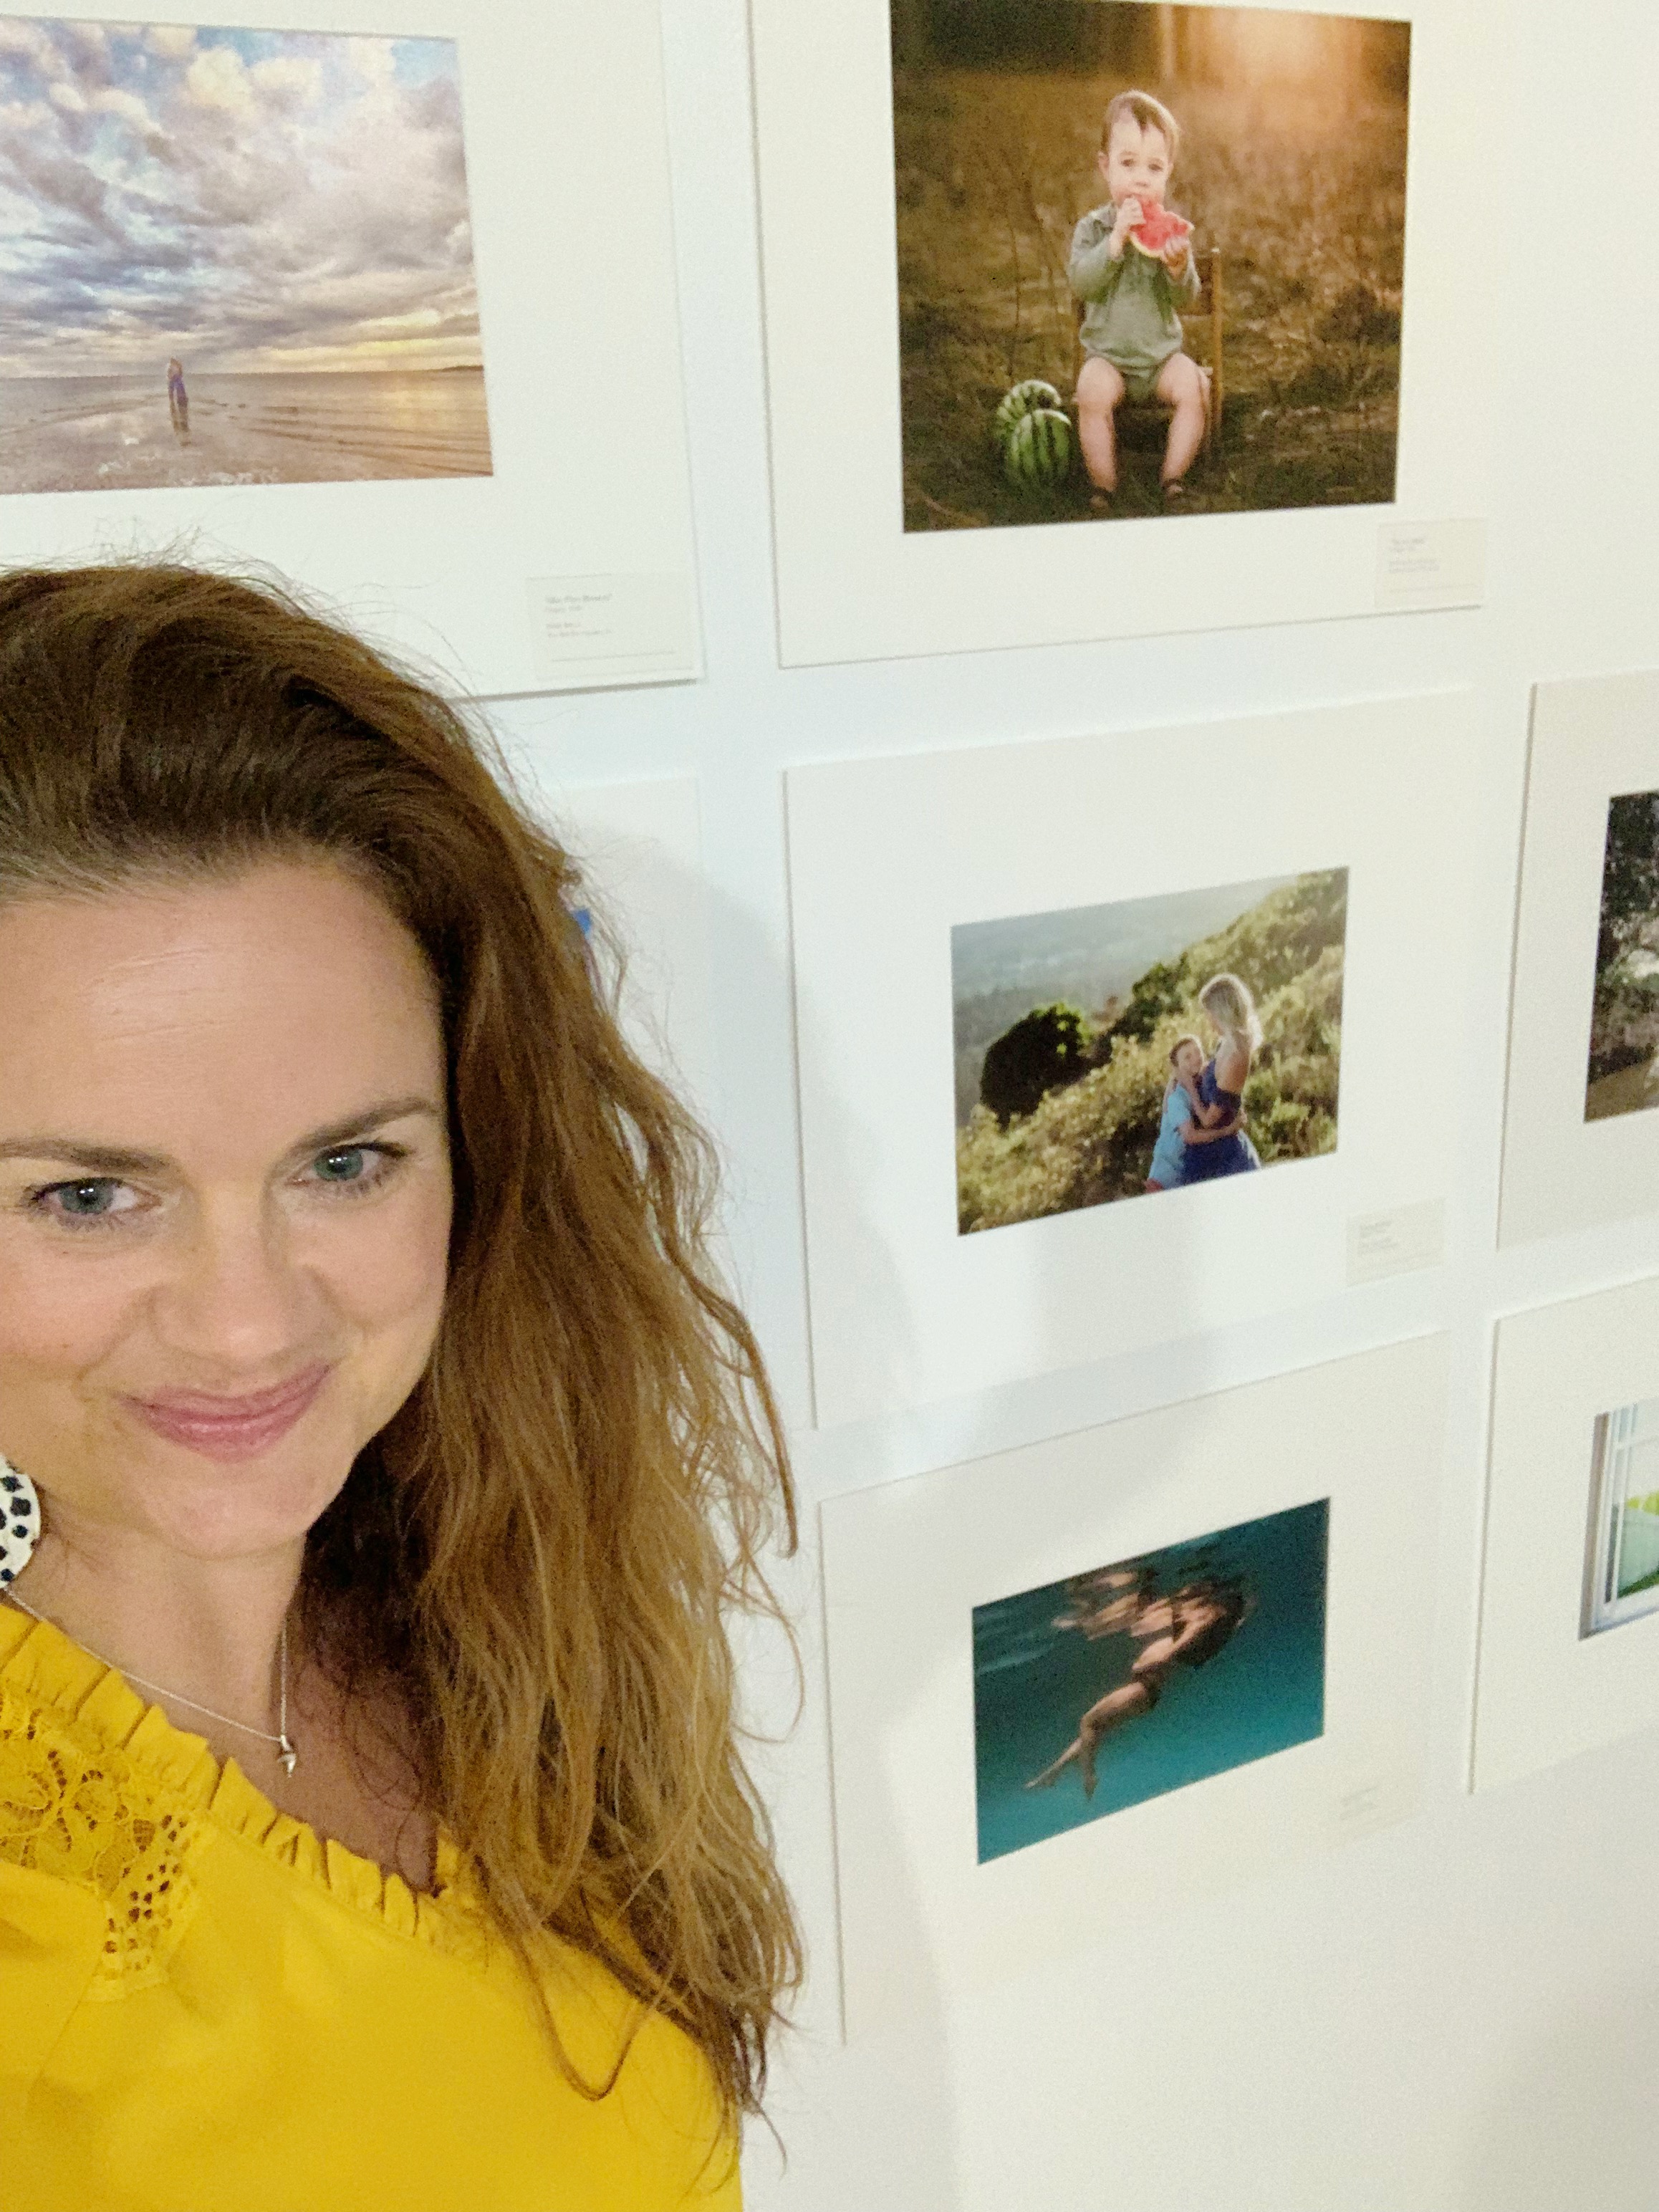 NAPCP INSPIRED Gallery Event and Print Competition Featured Artist Renee Stengel Photography "Color" Category with Image "Tropical Anticipation"